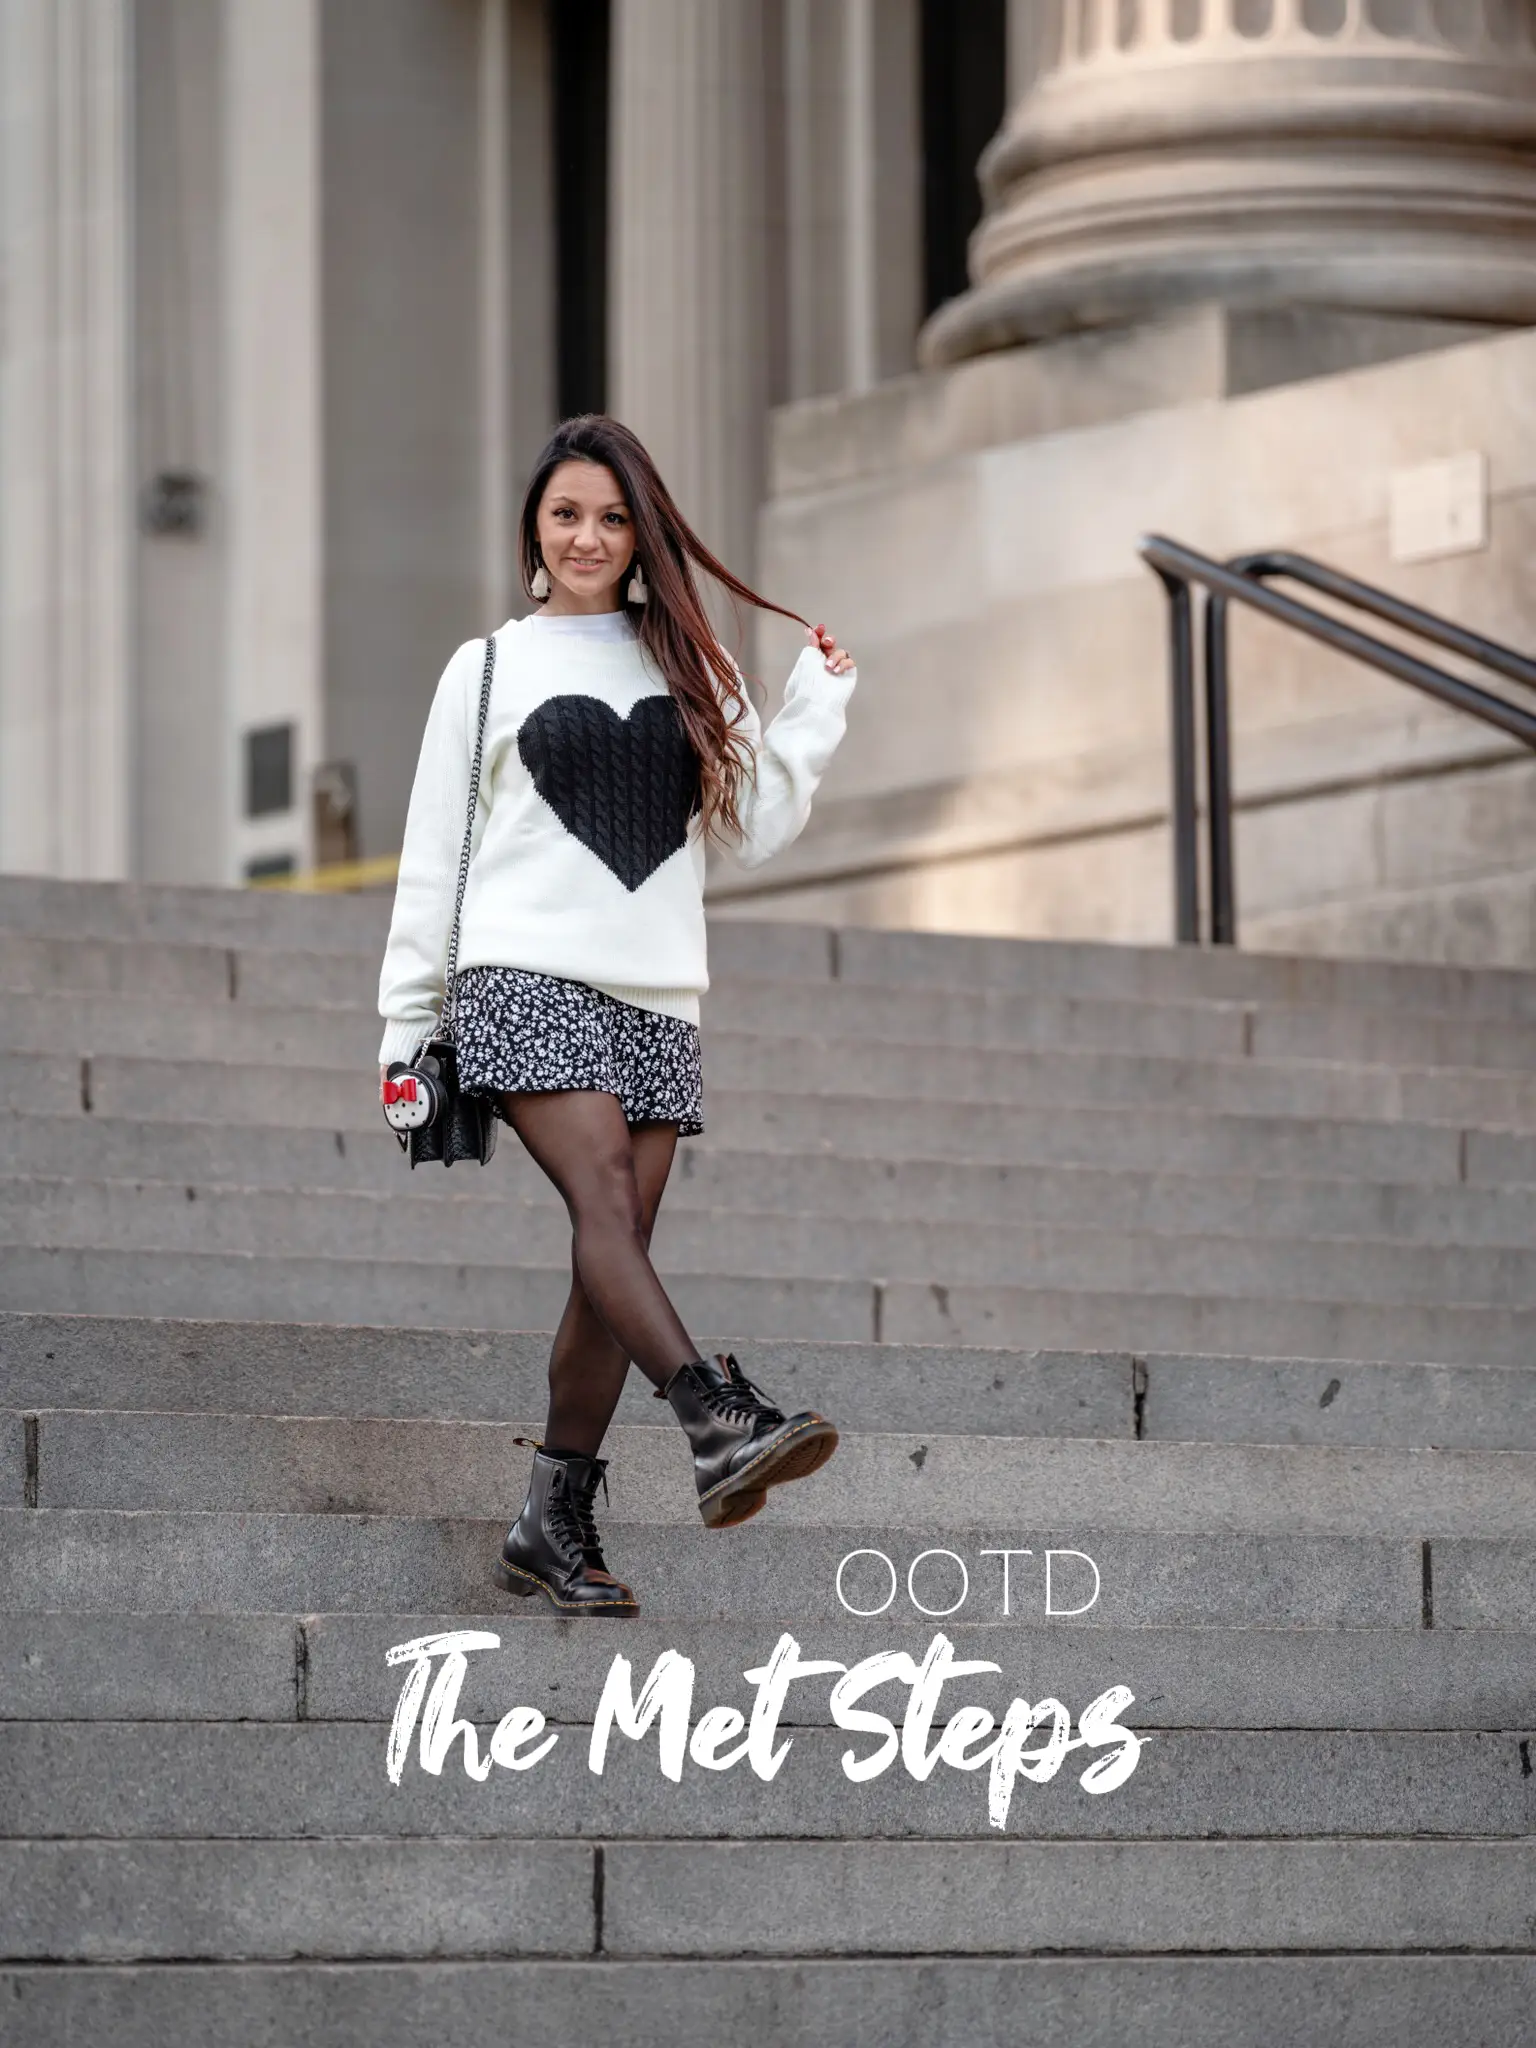 WHAT I WORE TO THE MET, Gallery posted by Sstephkoutss